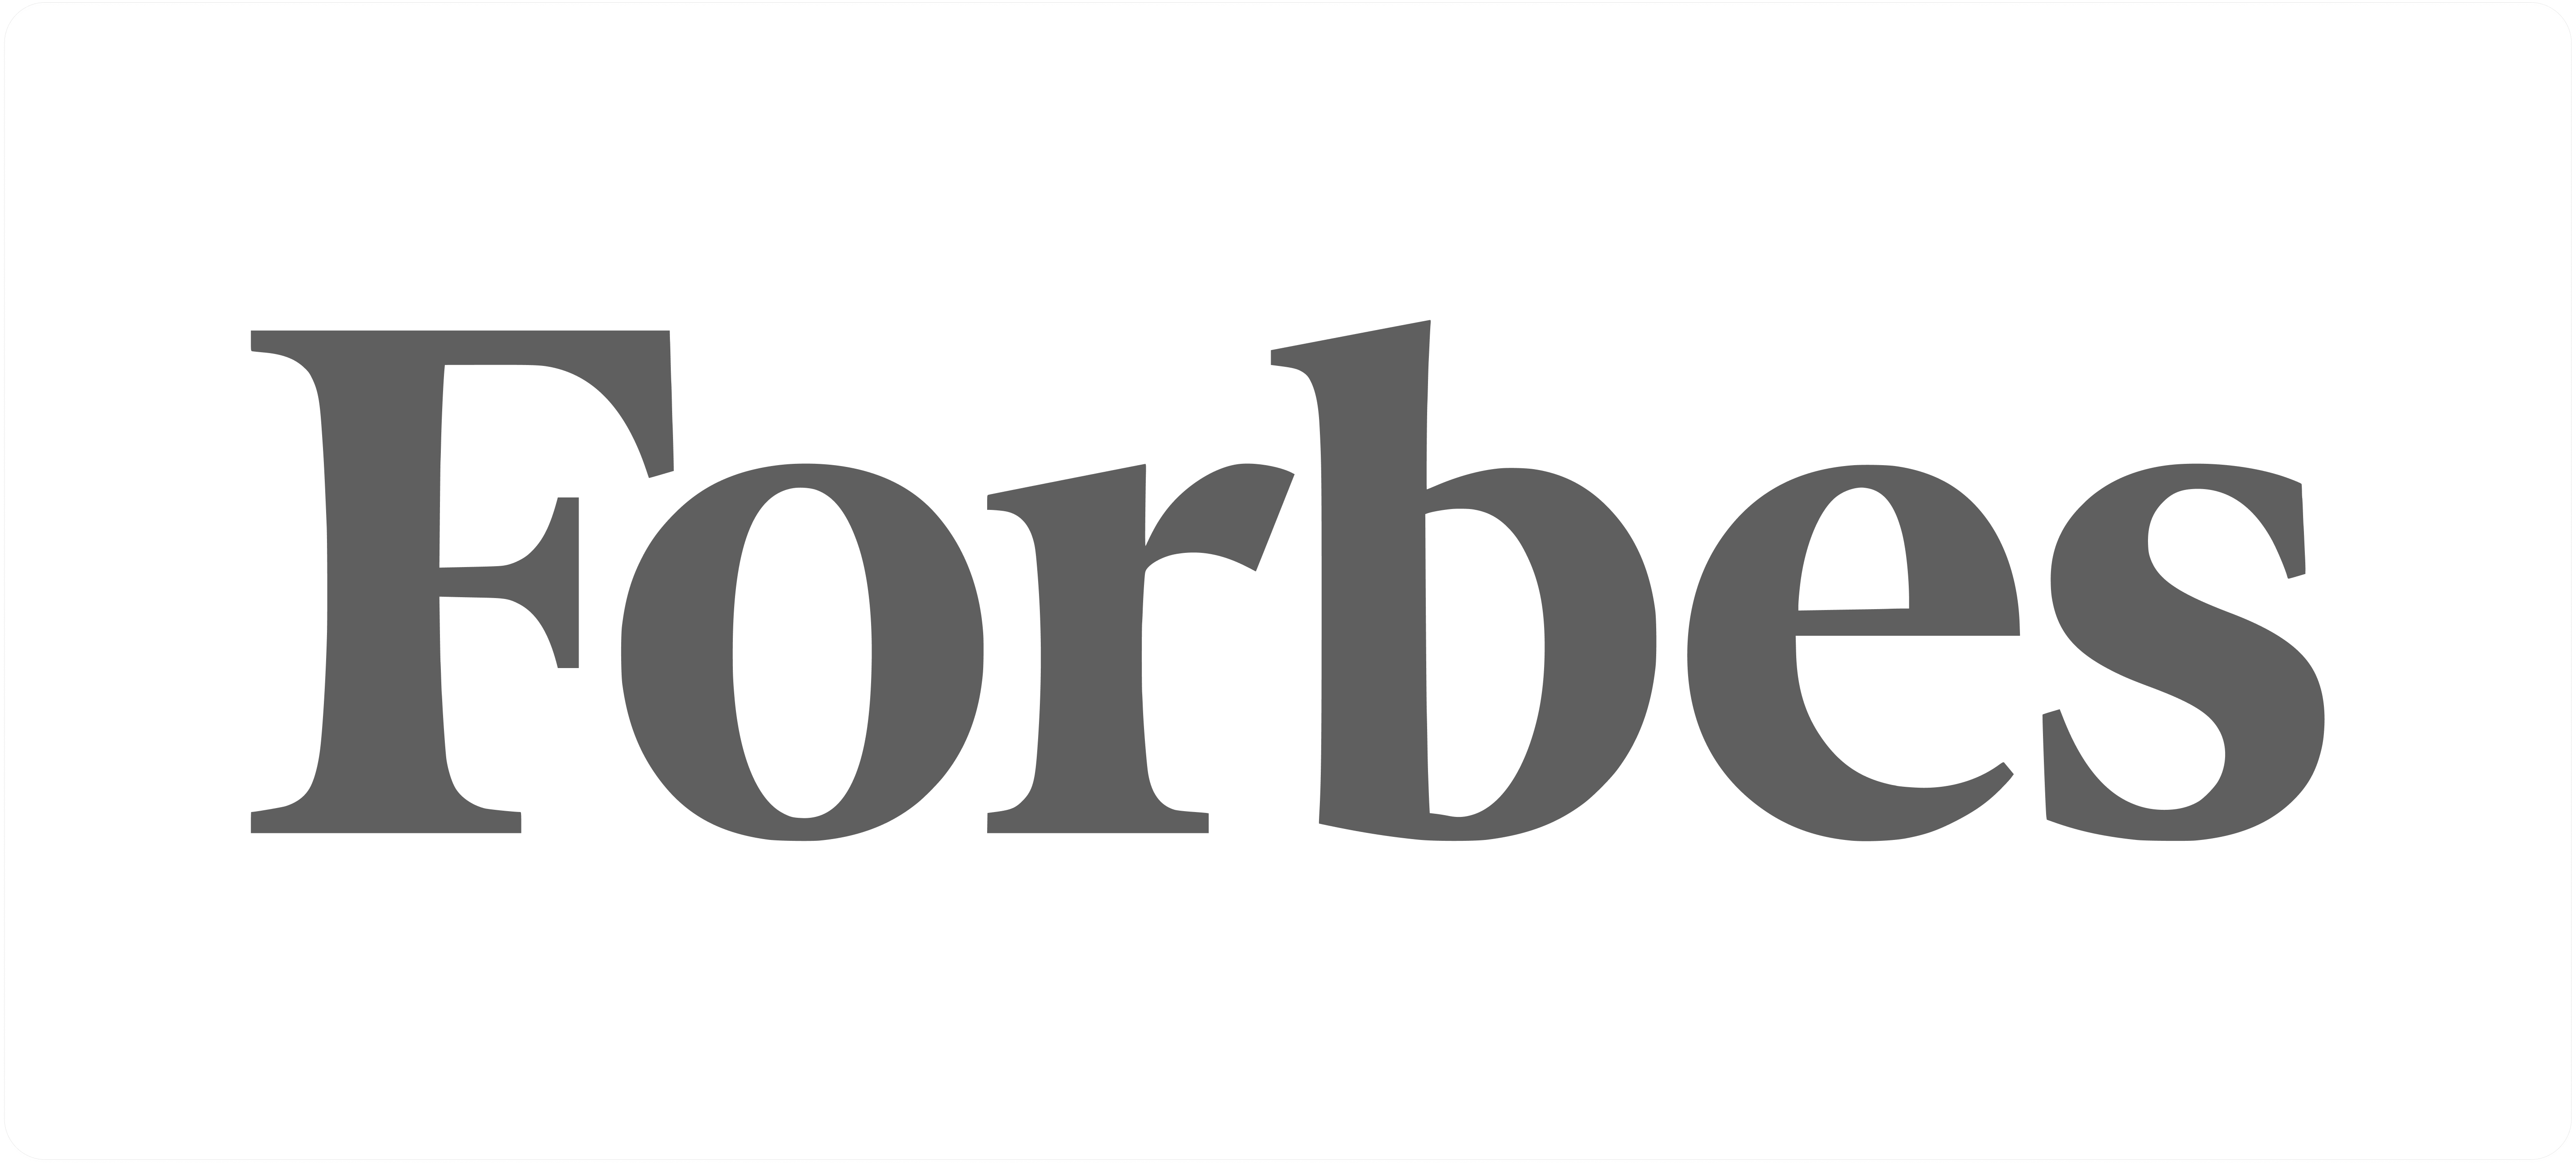 Zoe Financial | Find an Advisor | Forbes Feature